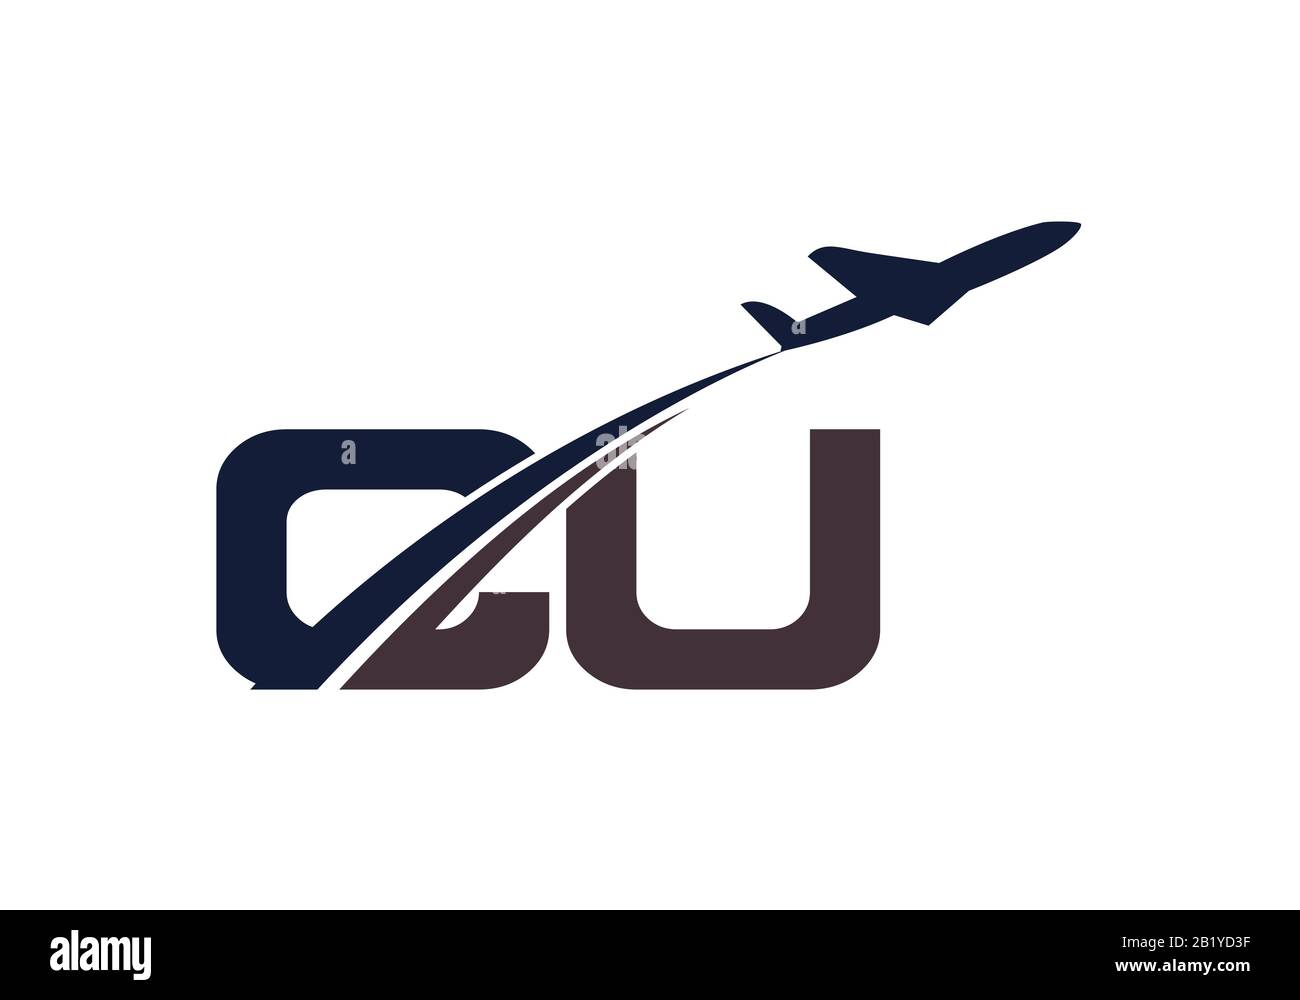 Initial Letter C and U  with Aviation Logo Design, Air, Airline, Airplane and Travel Logo template. Stock Vector